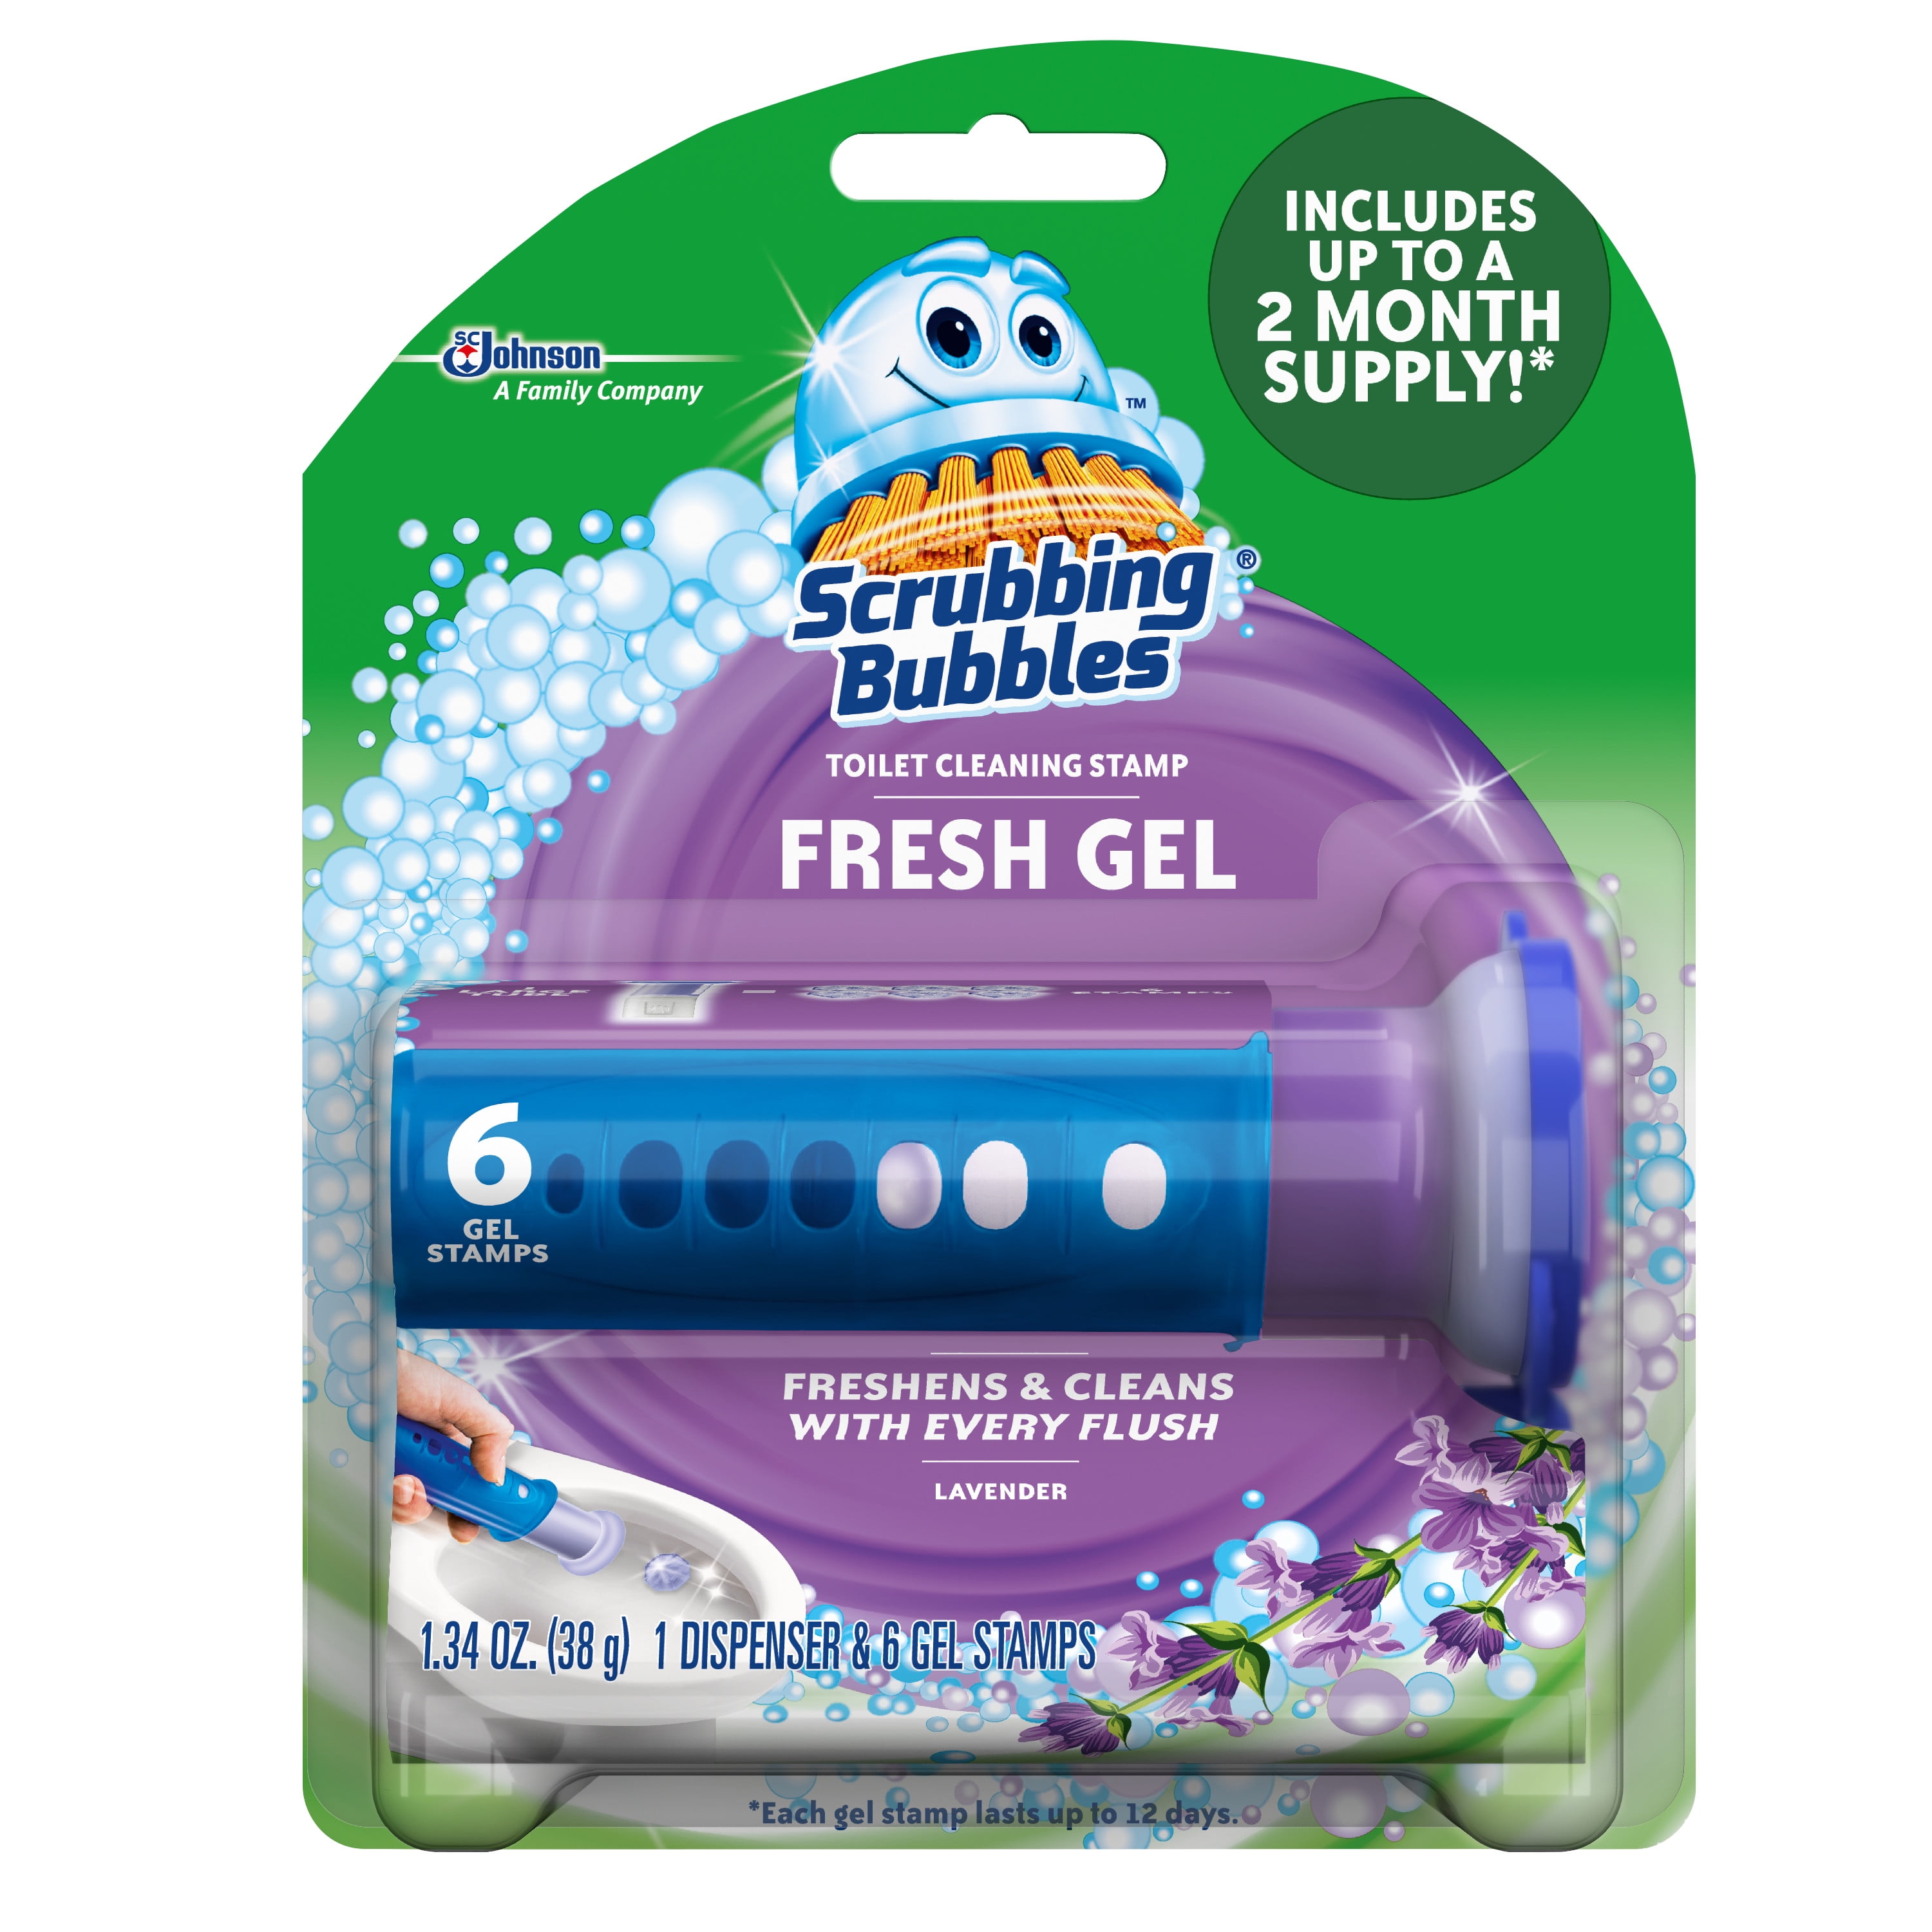 scrubbing bubbles gel stamp review